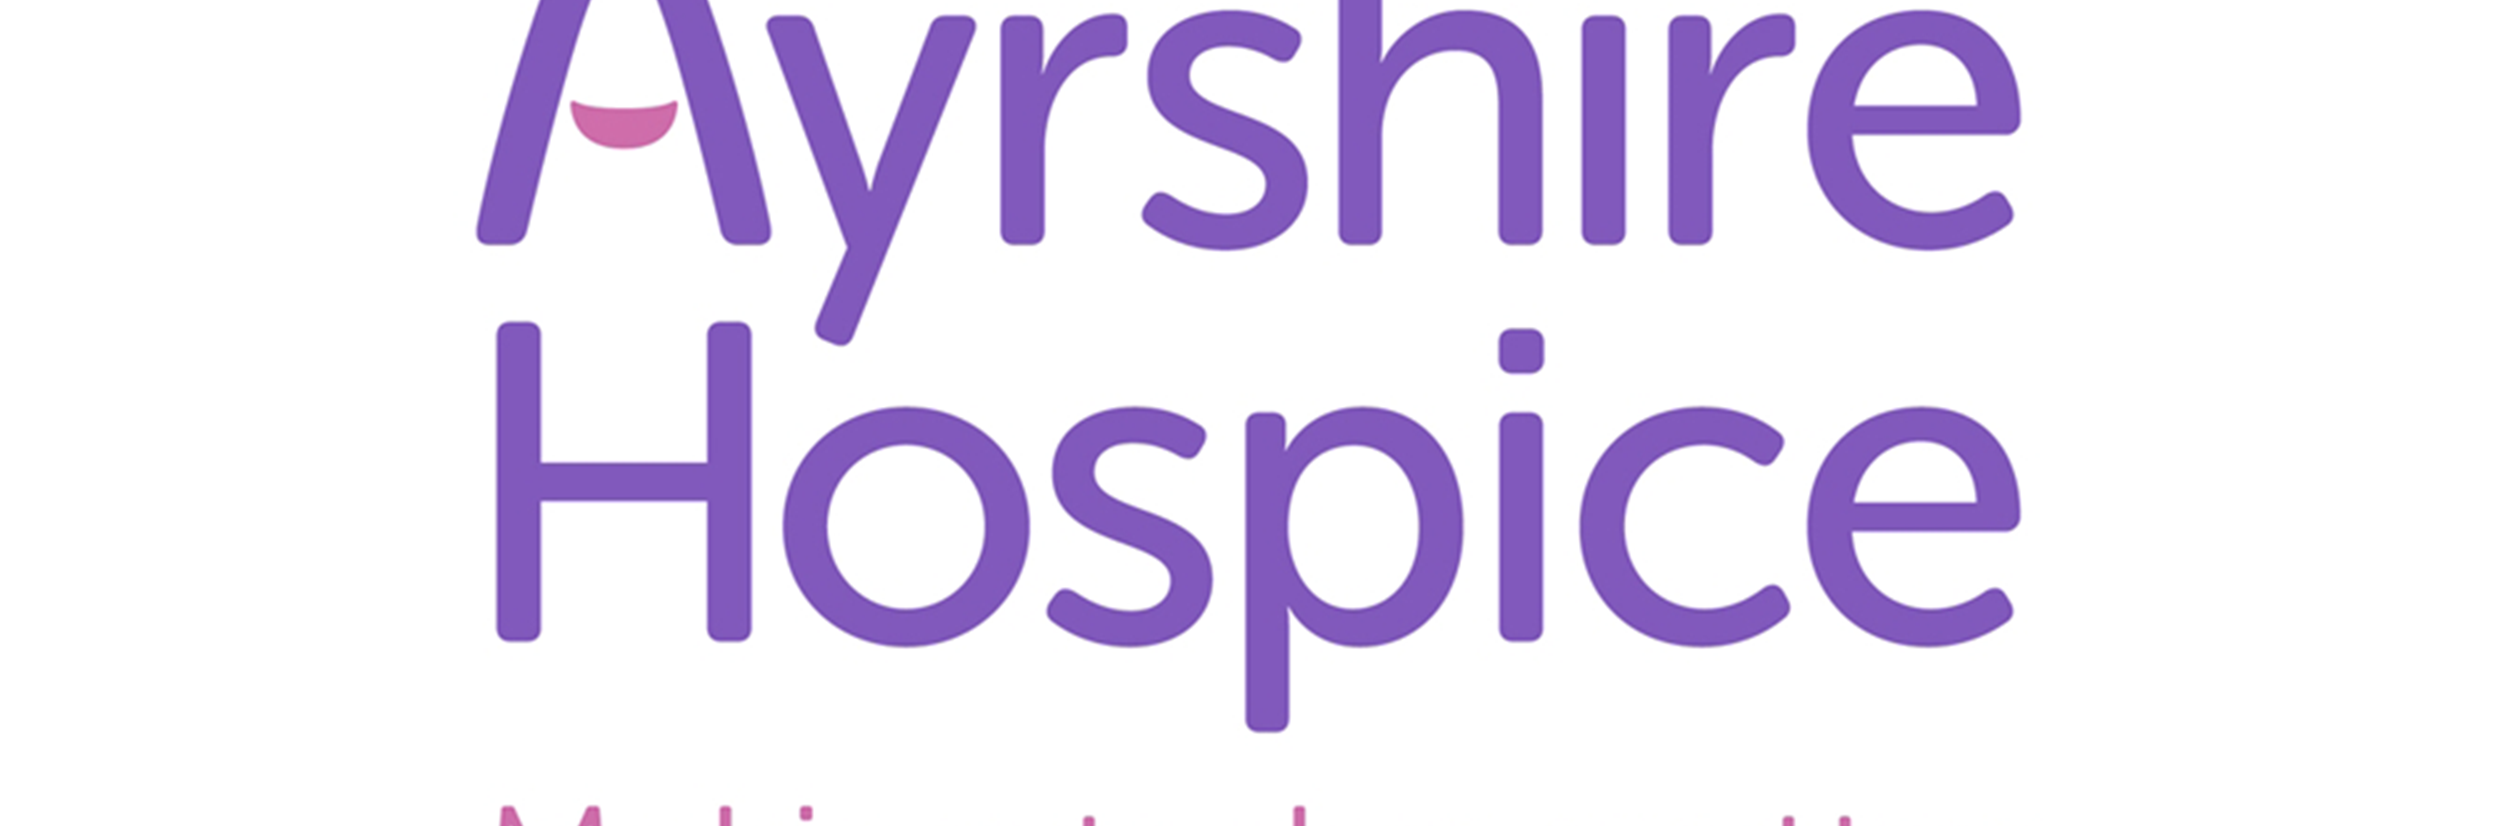 2022 Nominated Charity of the Year - Ayrshire Hospice